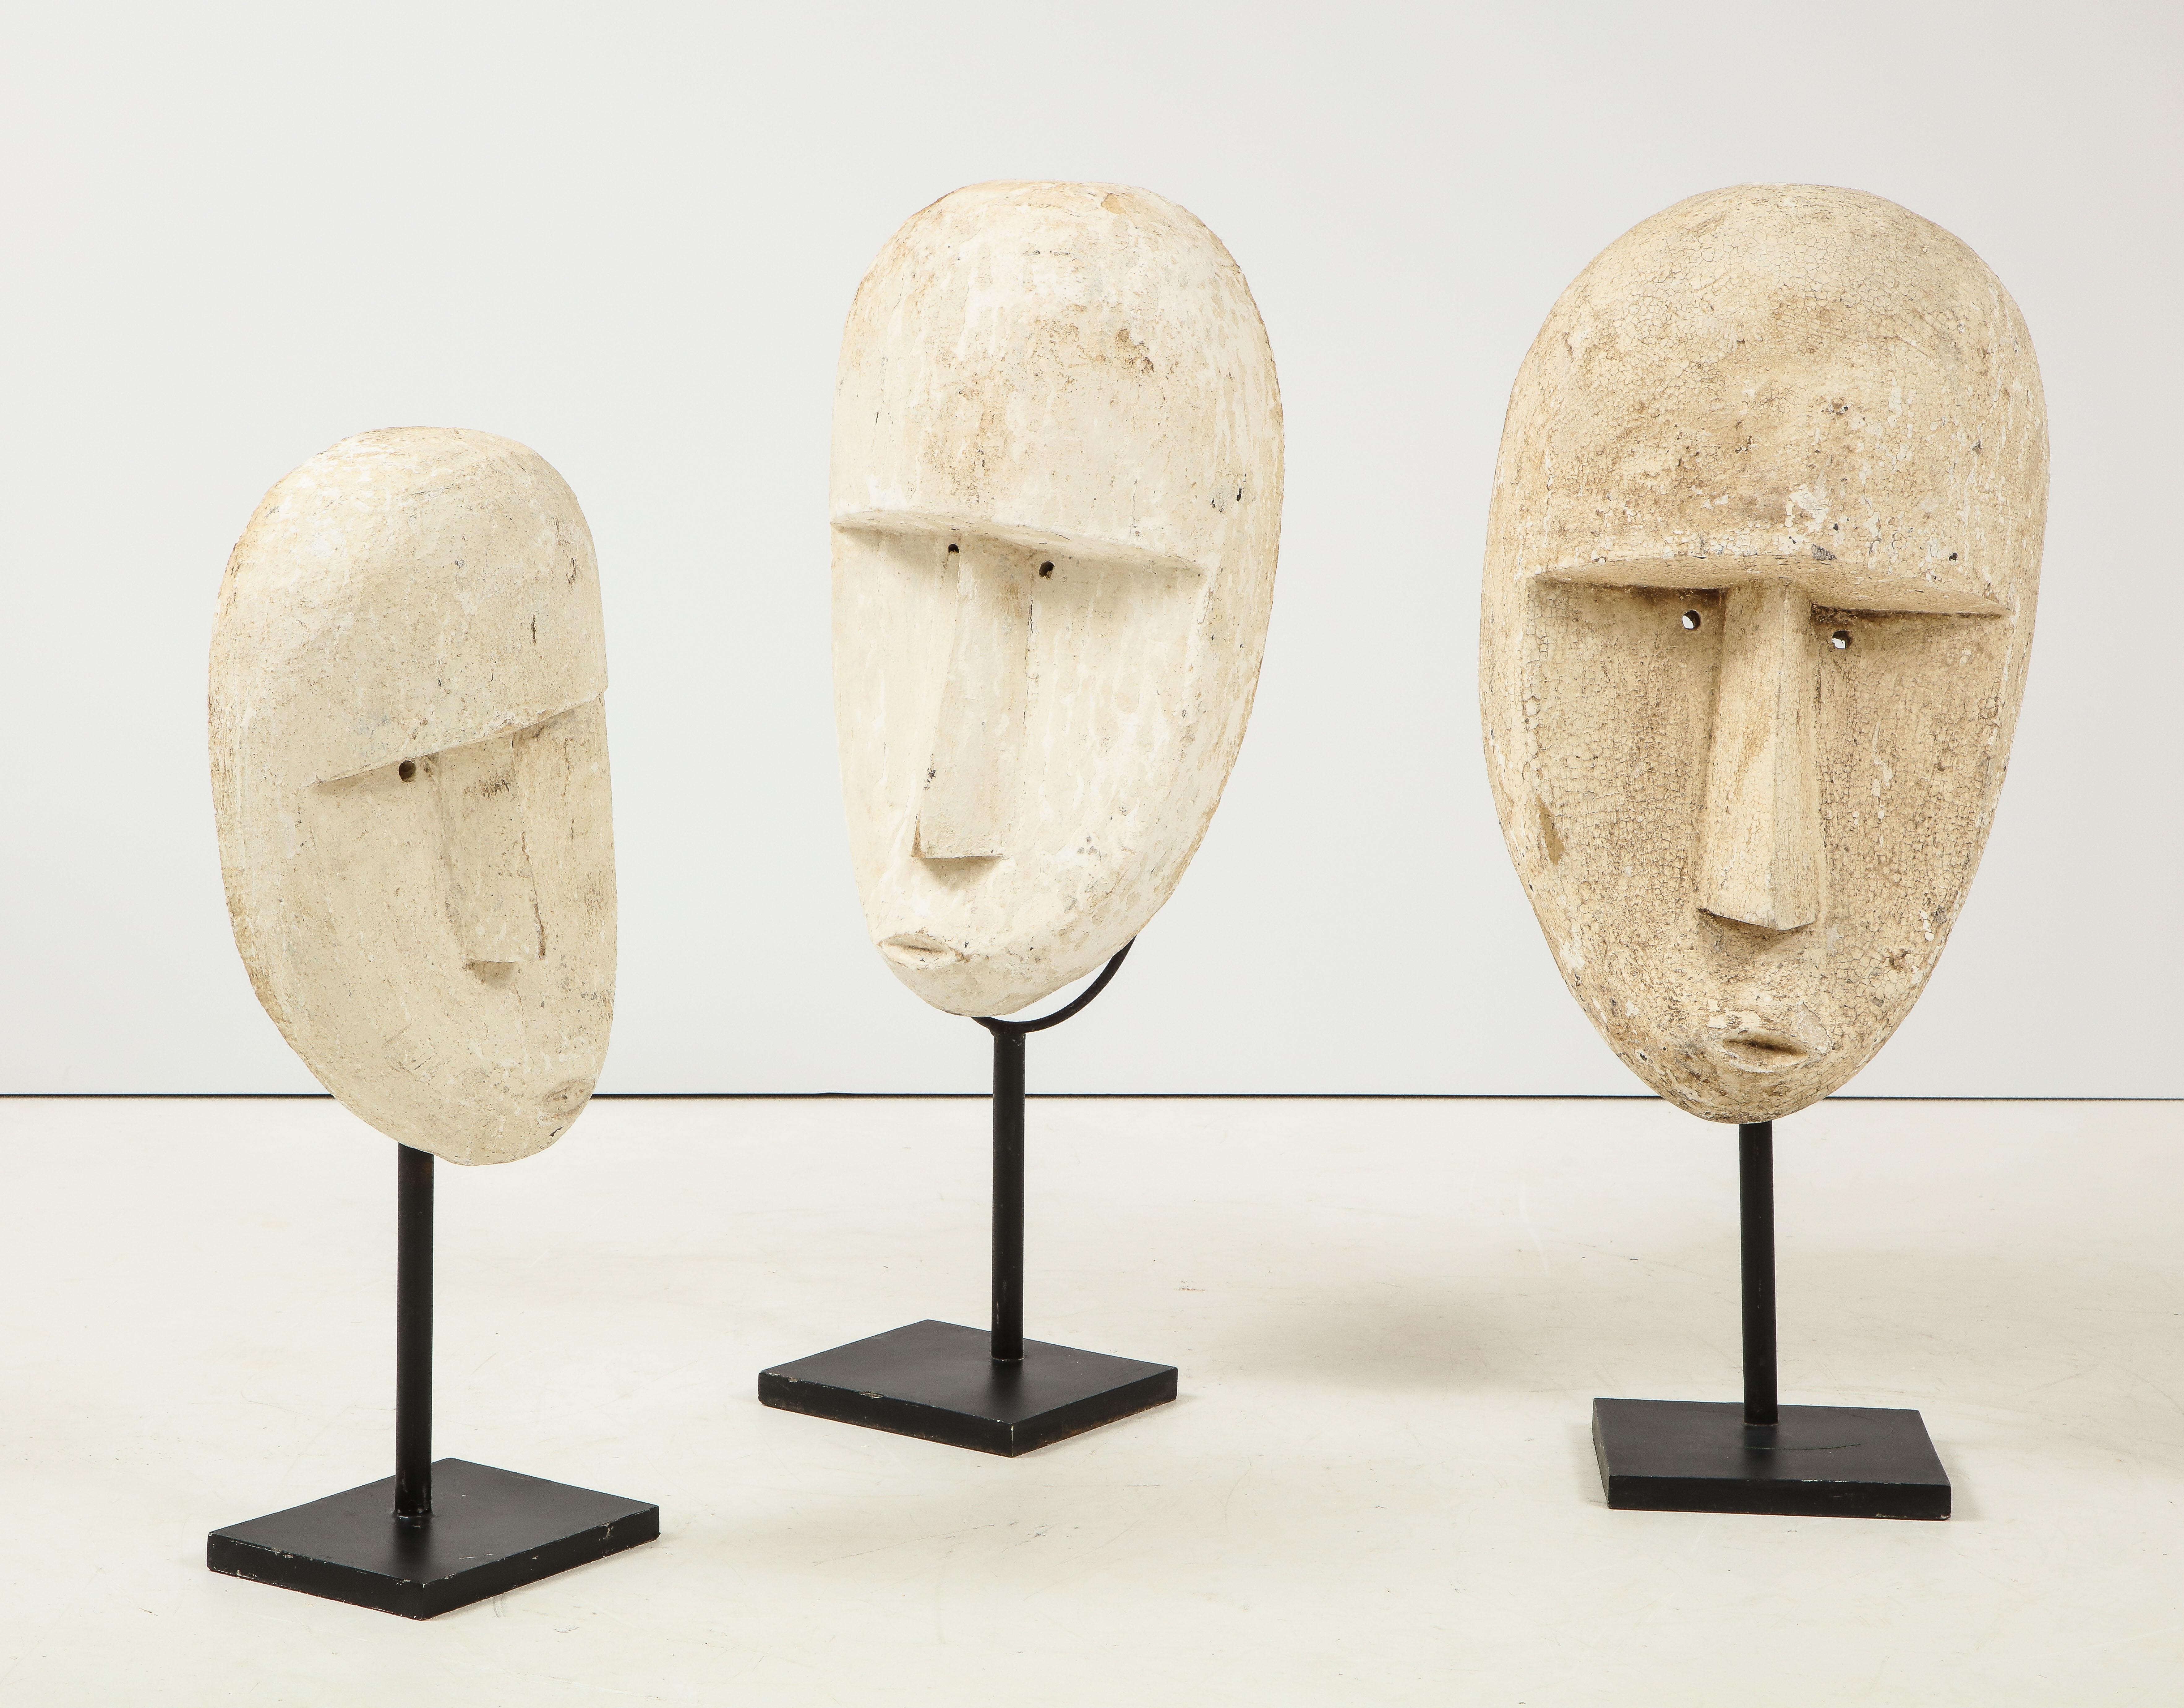 Carved modernist plaster mask sculptures mounted on painted black metal bases and supported stand.
Bali, Indonesia, circa 1970s
Size: largest (pictured on right) 37 3/4